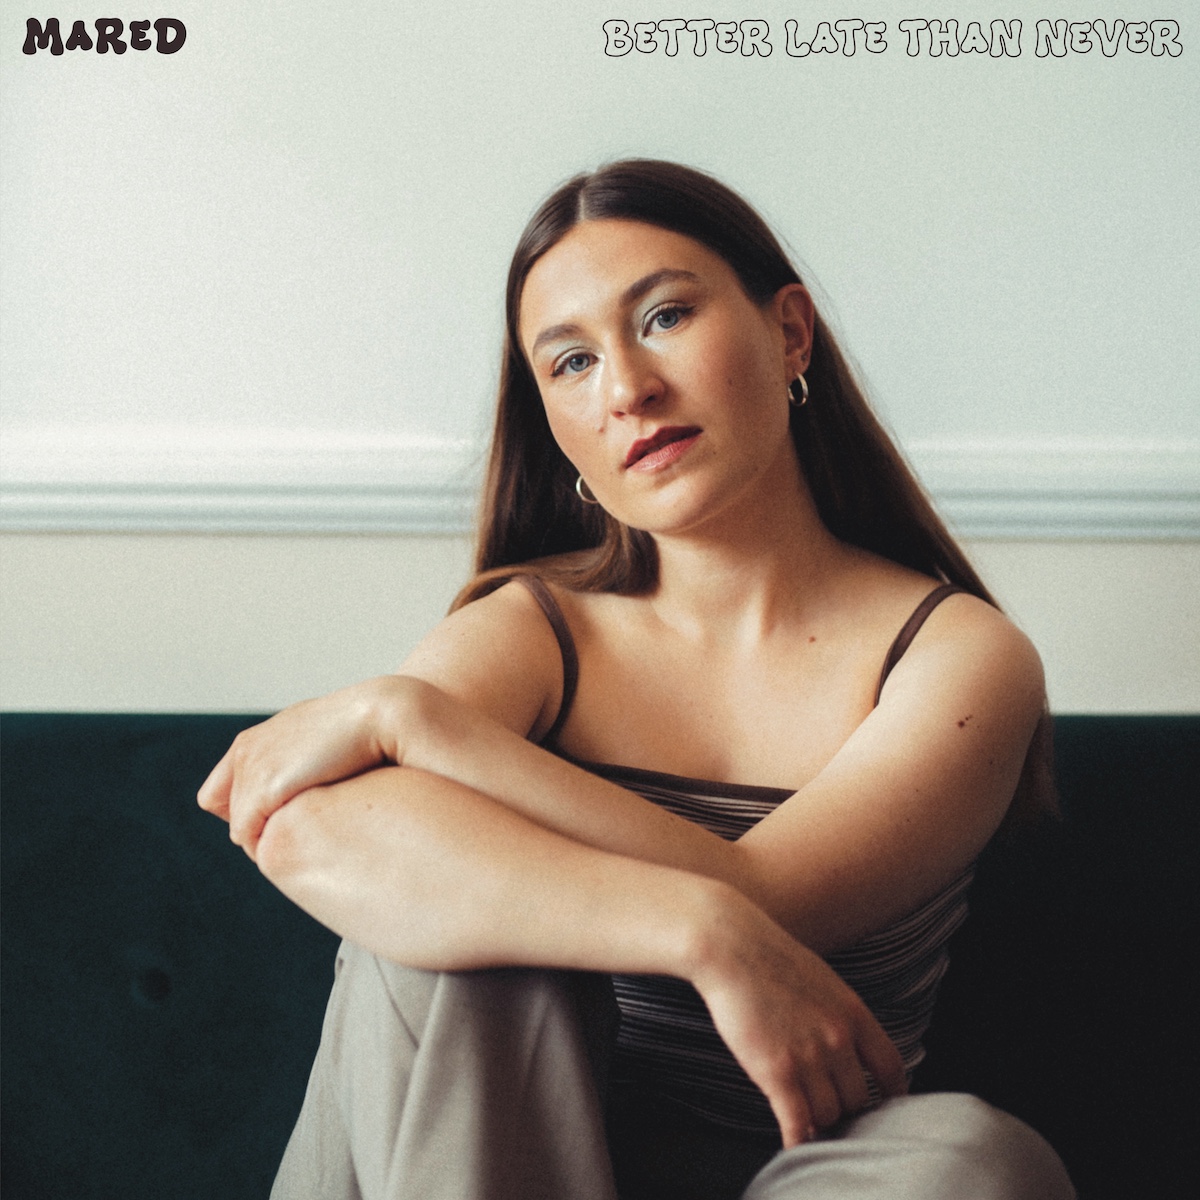 EP REVIEW: Better Late Than Never by Mared